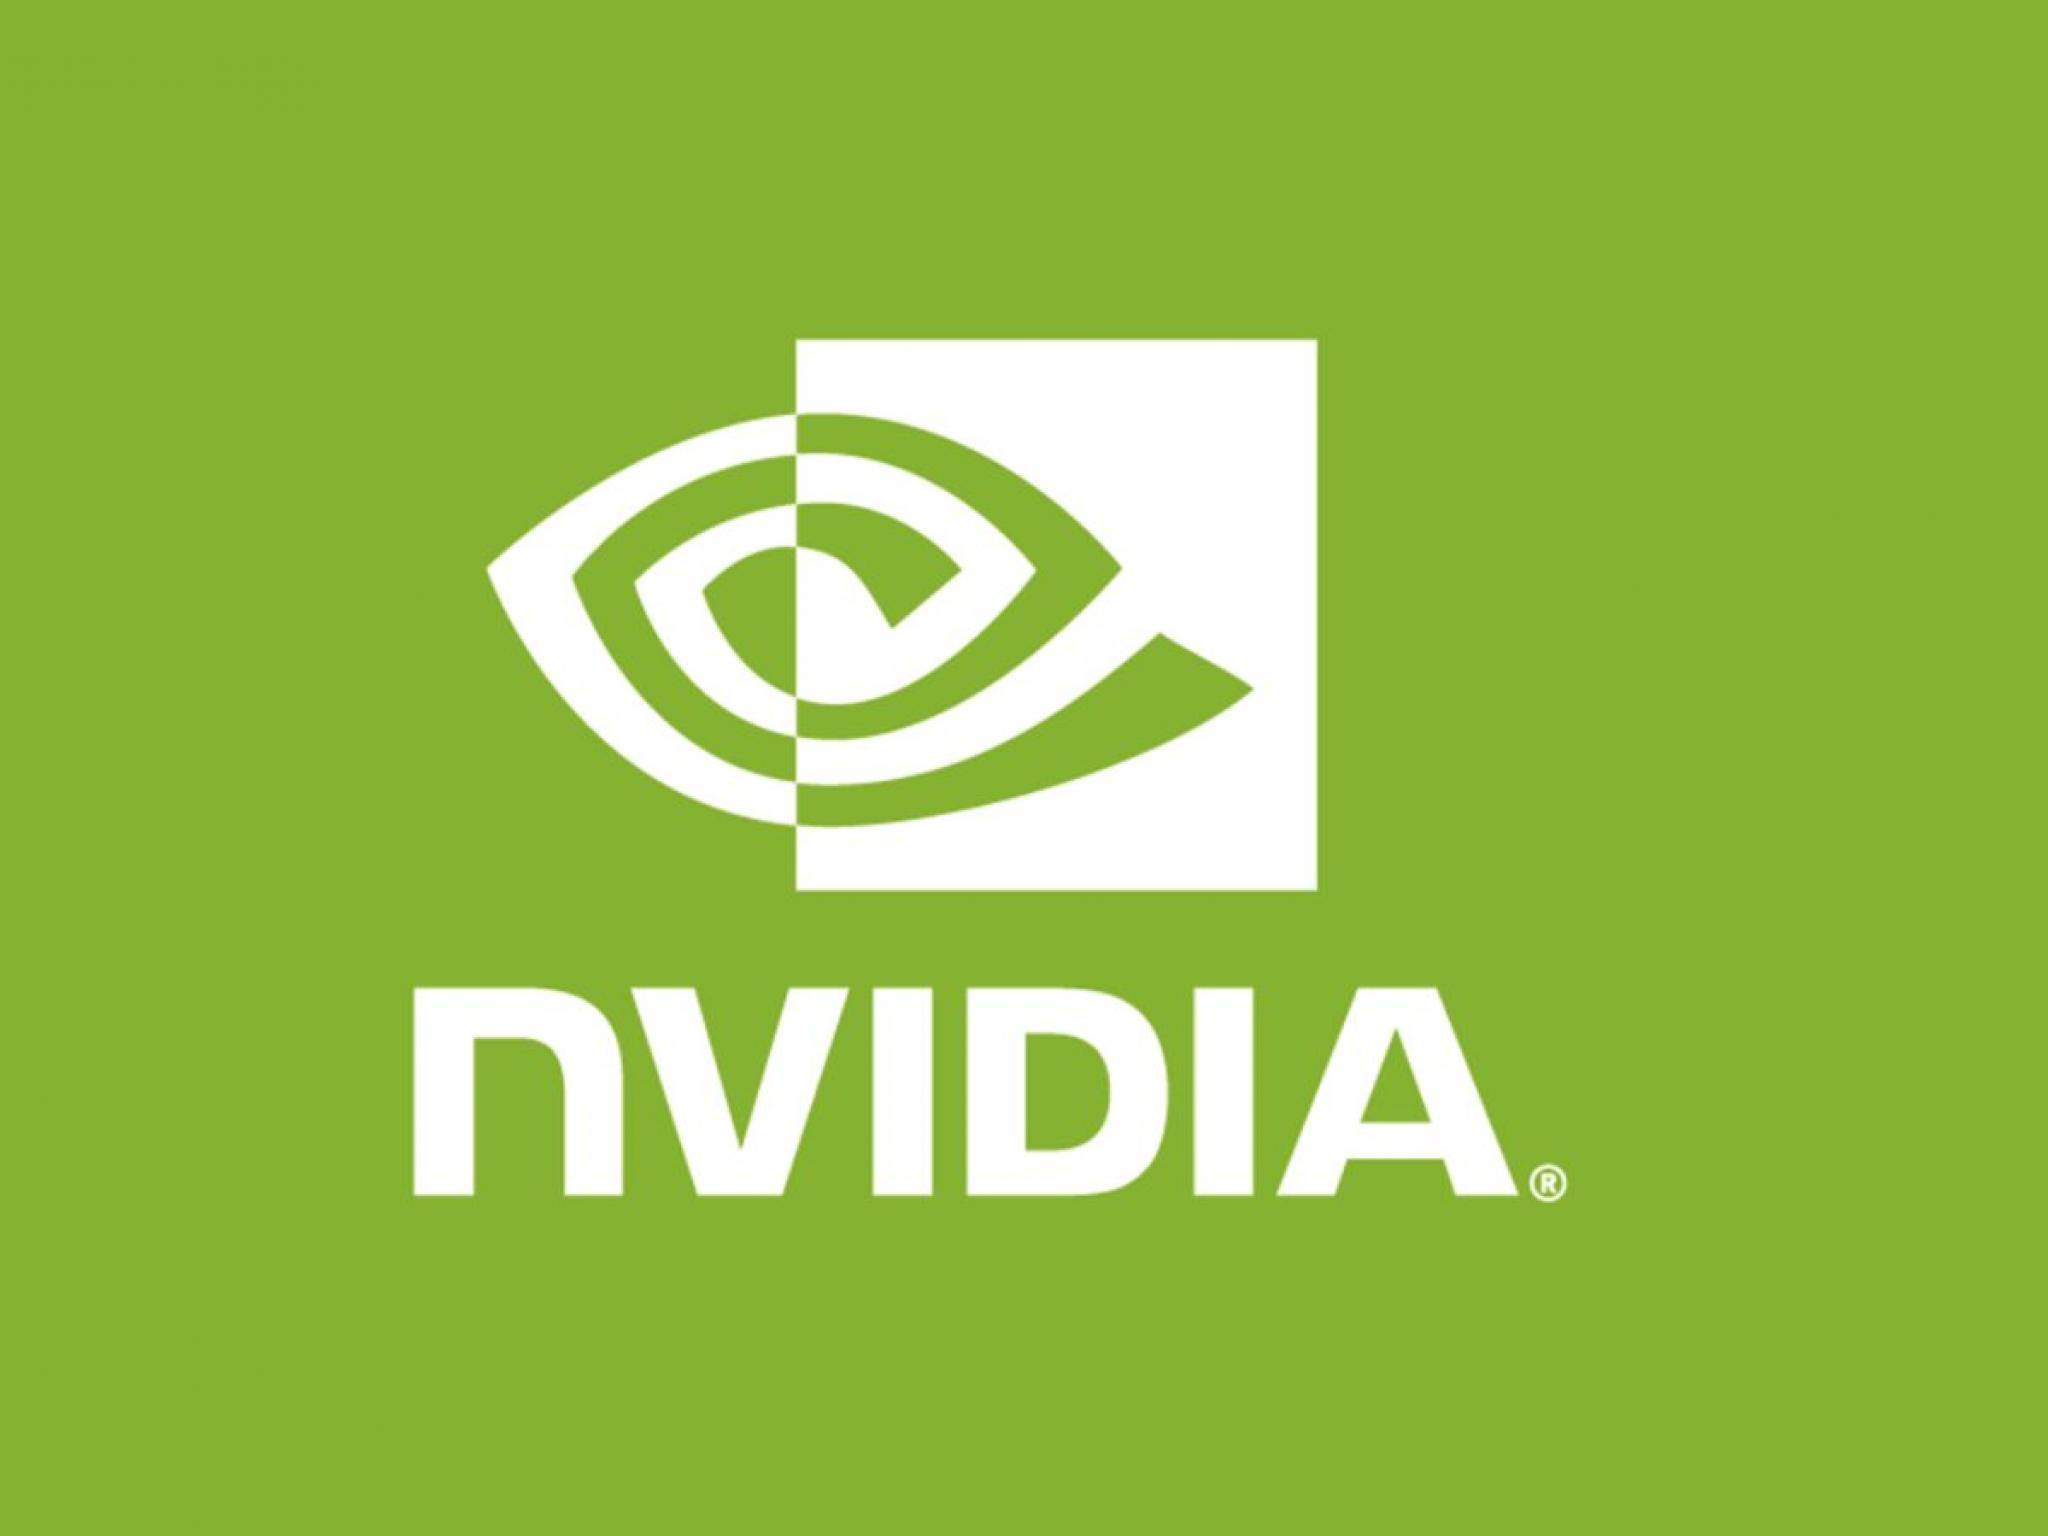  this-analyst-with-84-accuracy-rate-sees-more-than-41-upside-in-nvidia---here-are-5-stock-picks-for-last-week-from-wall-streets-most-accurate-analysts 